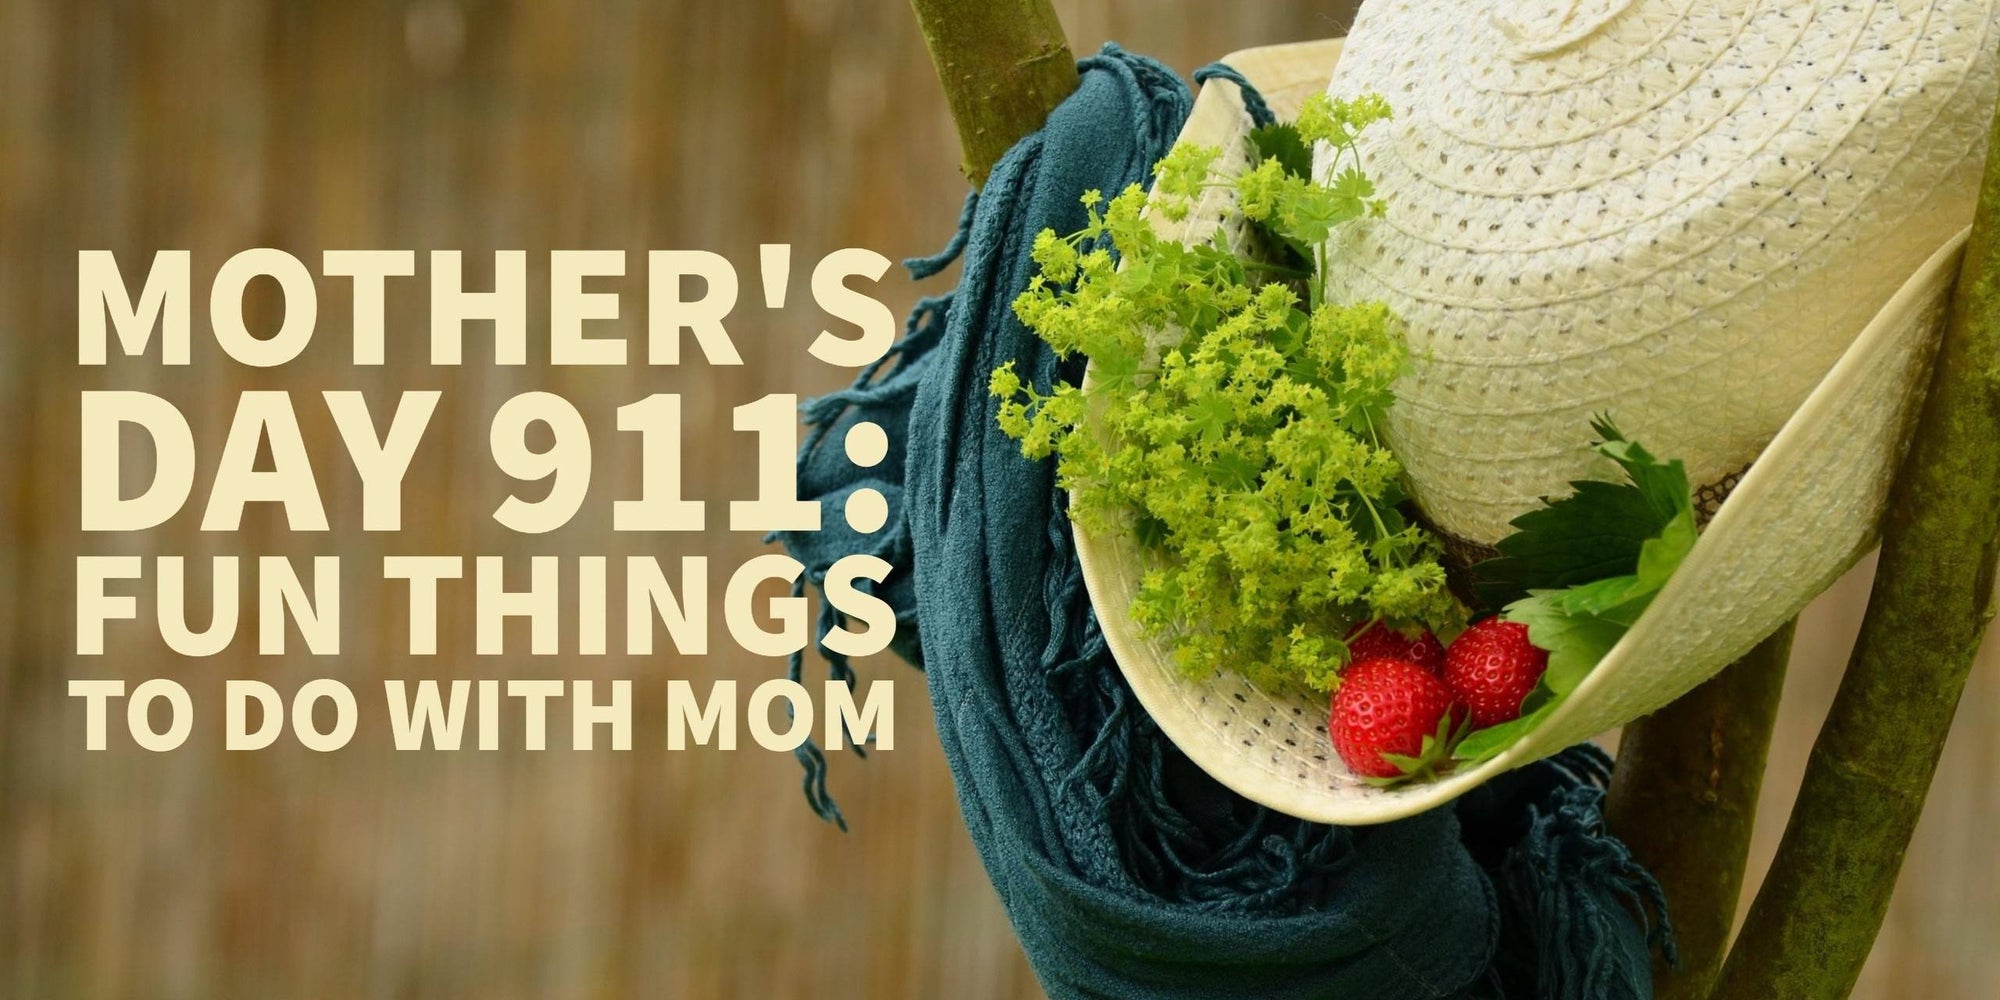 What to Do with Mom on Mother's Day